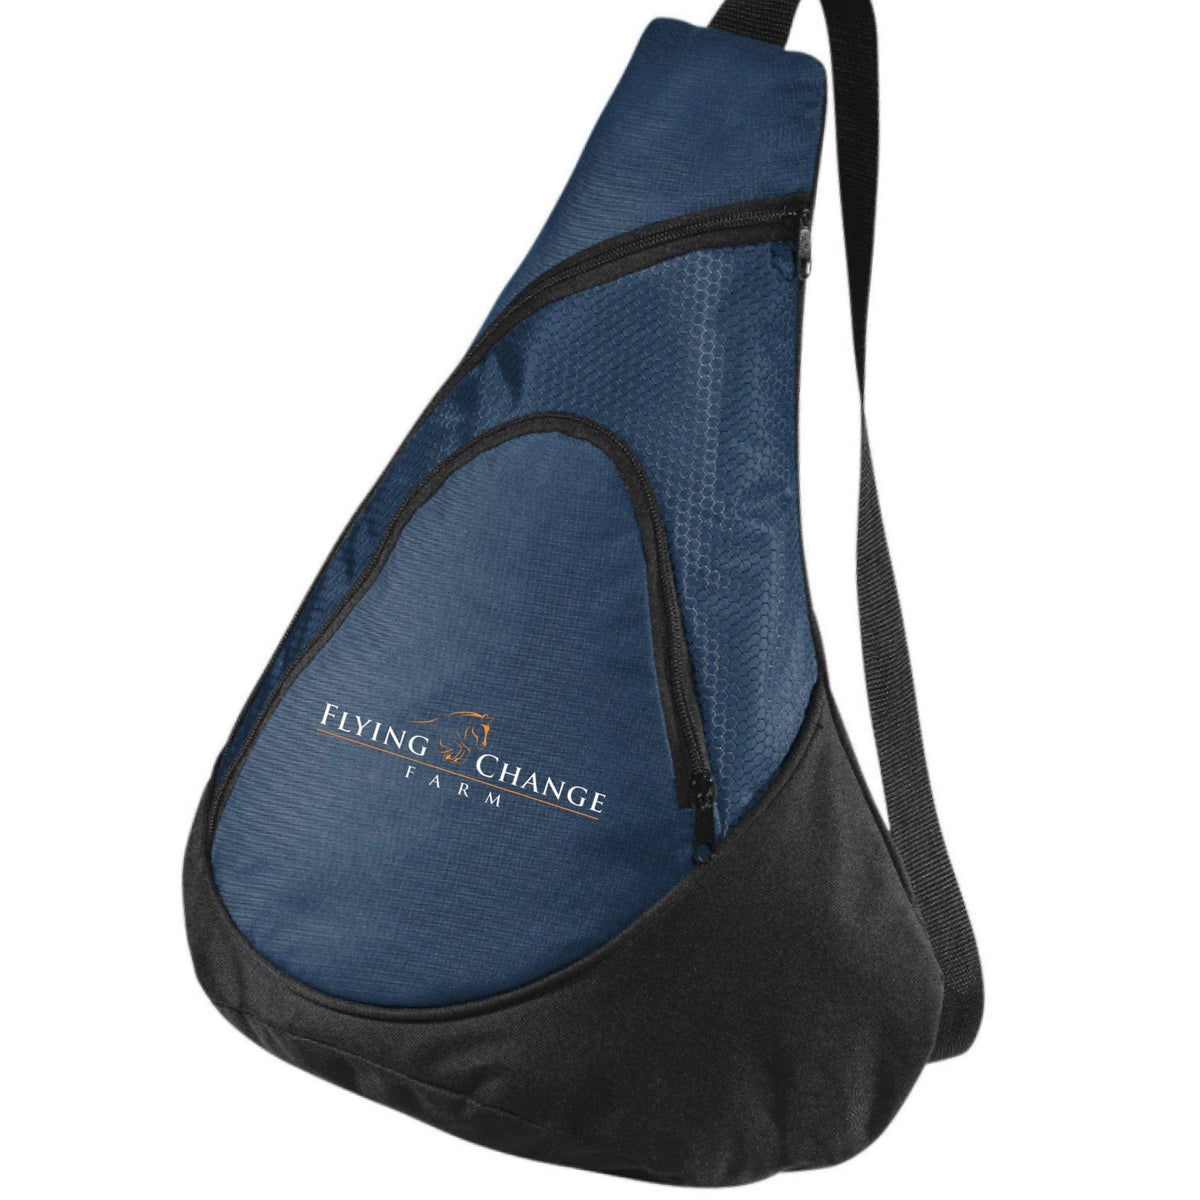 Equestrian Team Apparel Flying Change Farm Sling Backpack equestrian team apparel online tack store mobile tack store custom farm apparel custom show stable clothing equestrian lifestyle horse show clothing riding clothes horses equestrian tack store